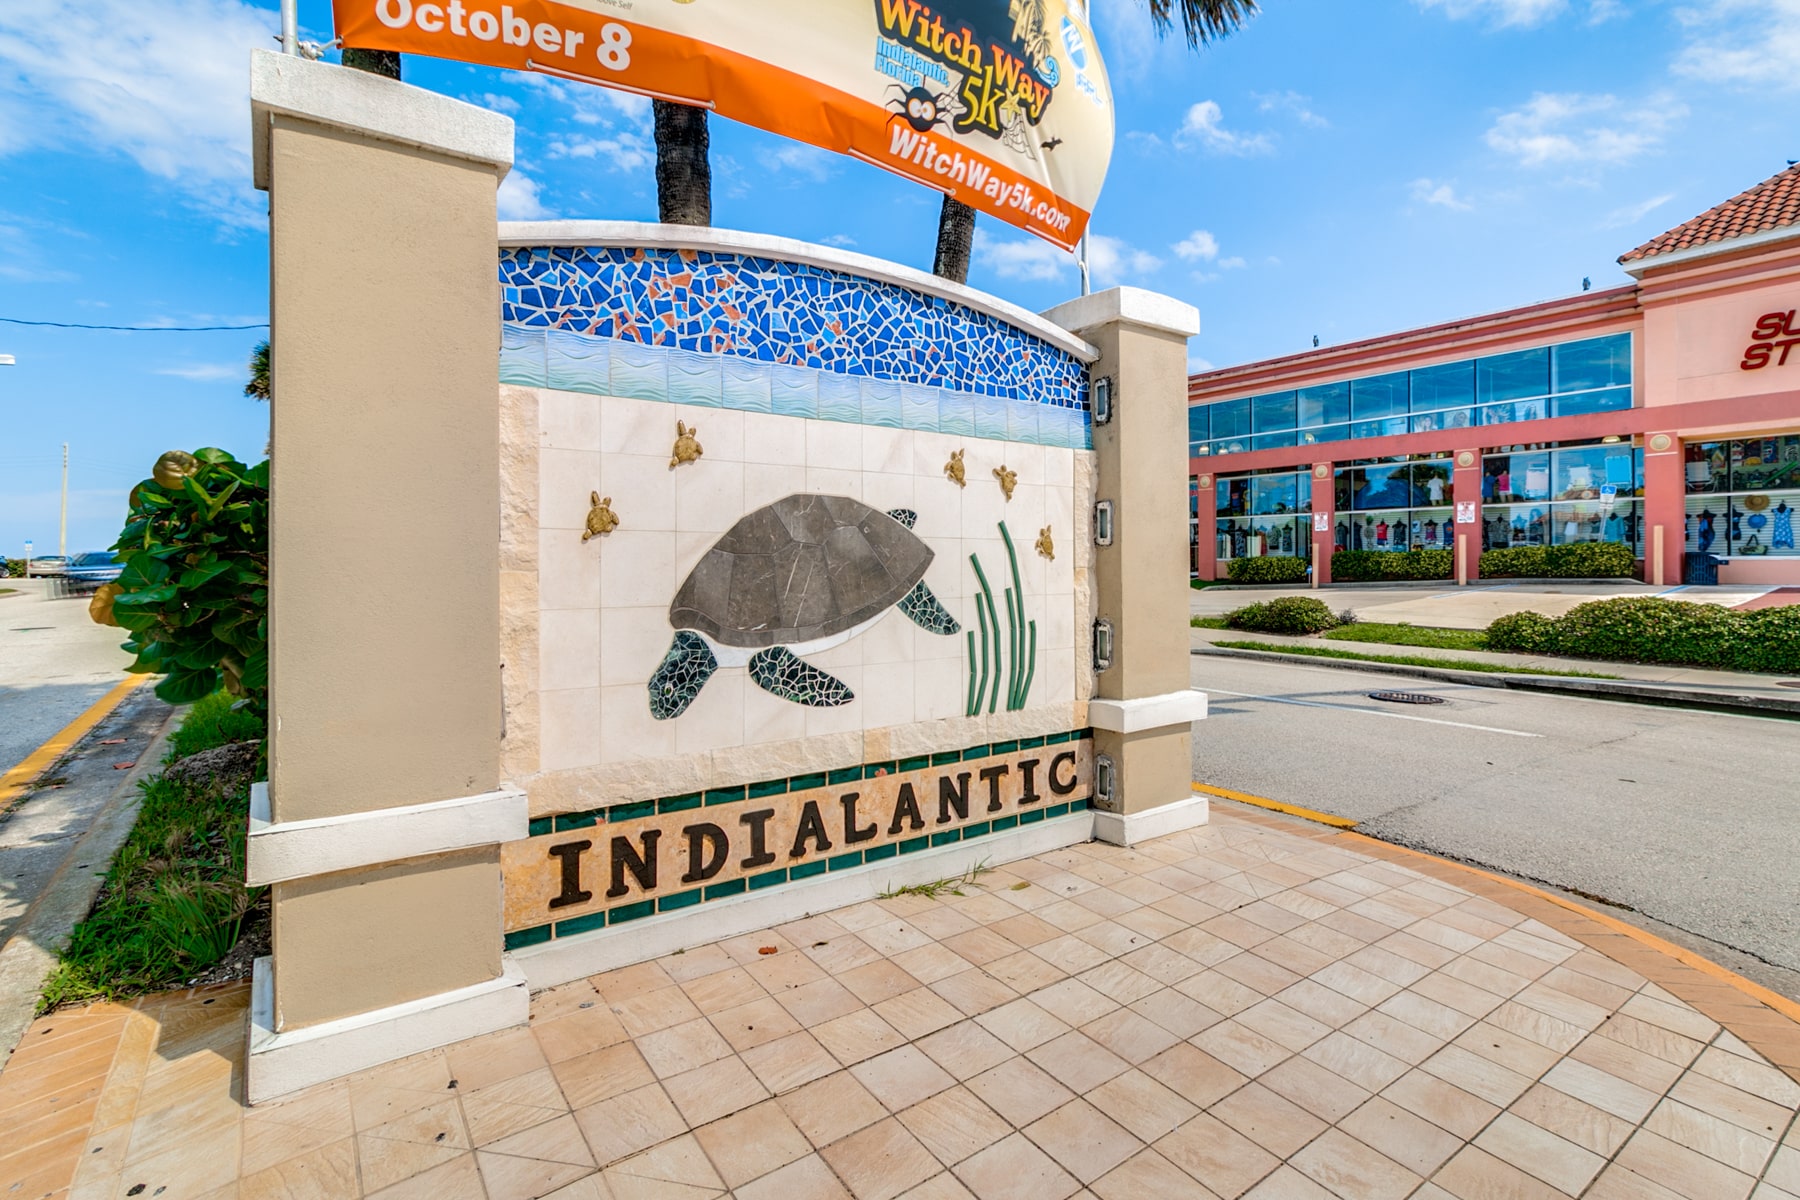 Indialantic fifth ave